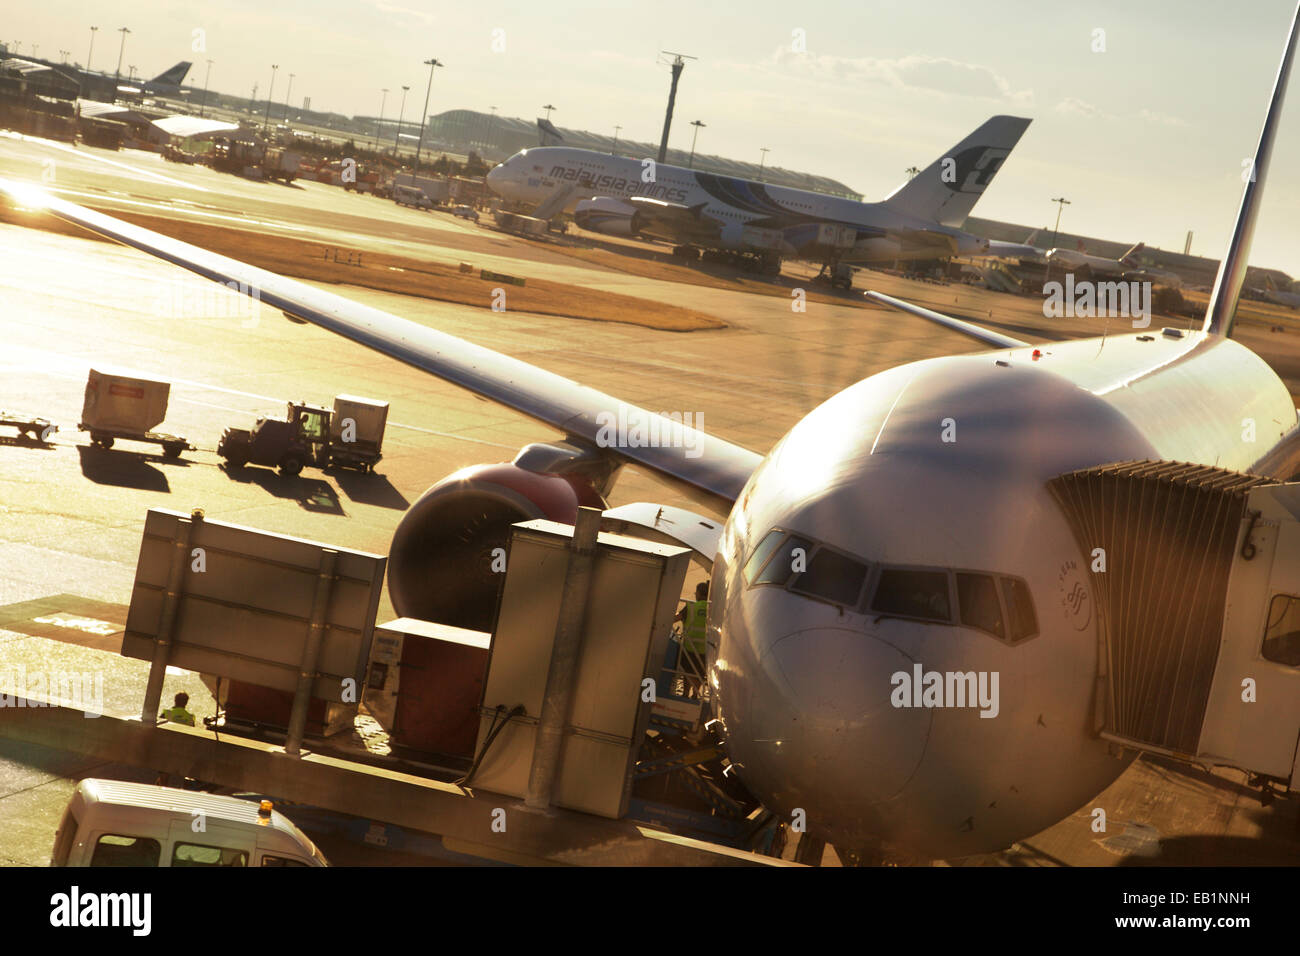 A plane being loaded at Heathrow airport, London Stock Photo